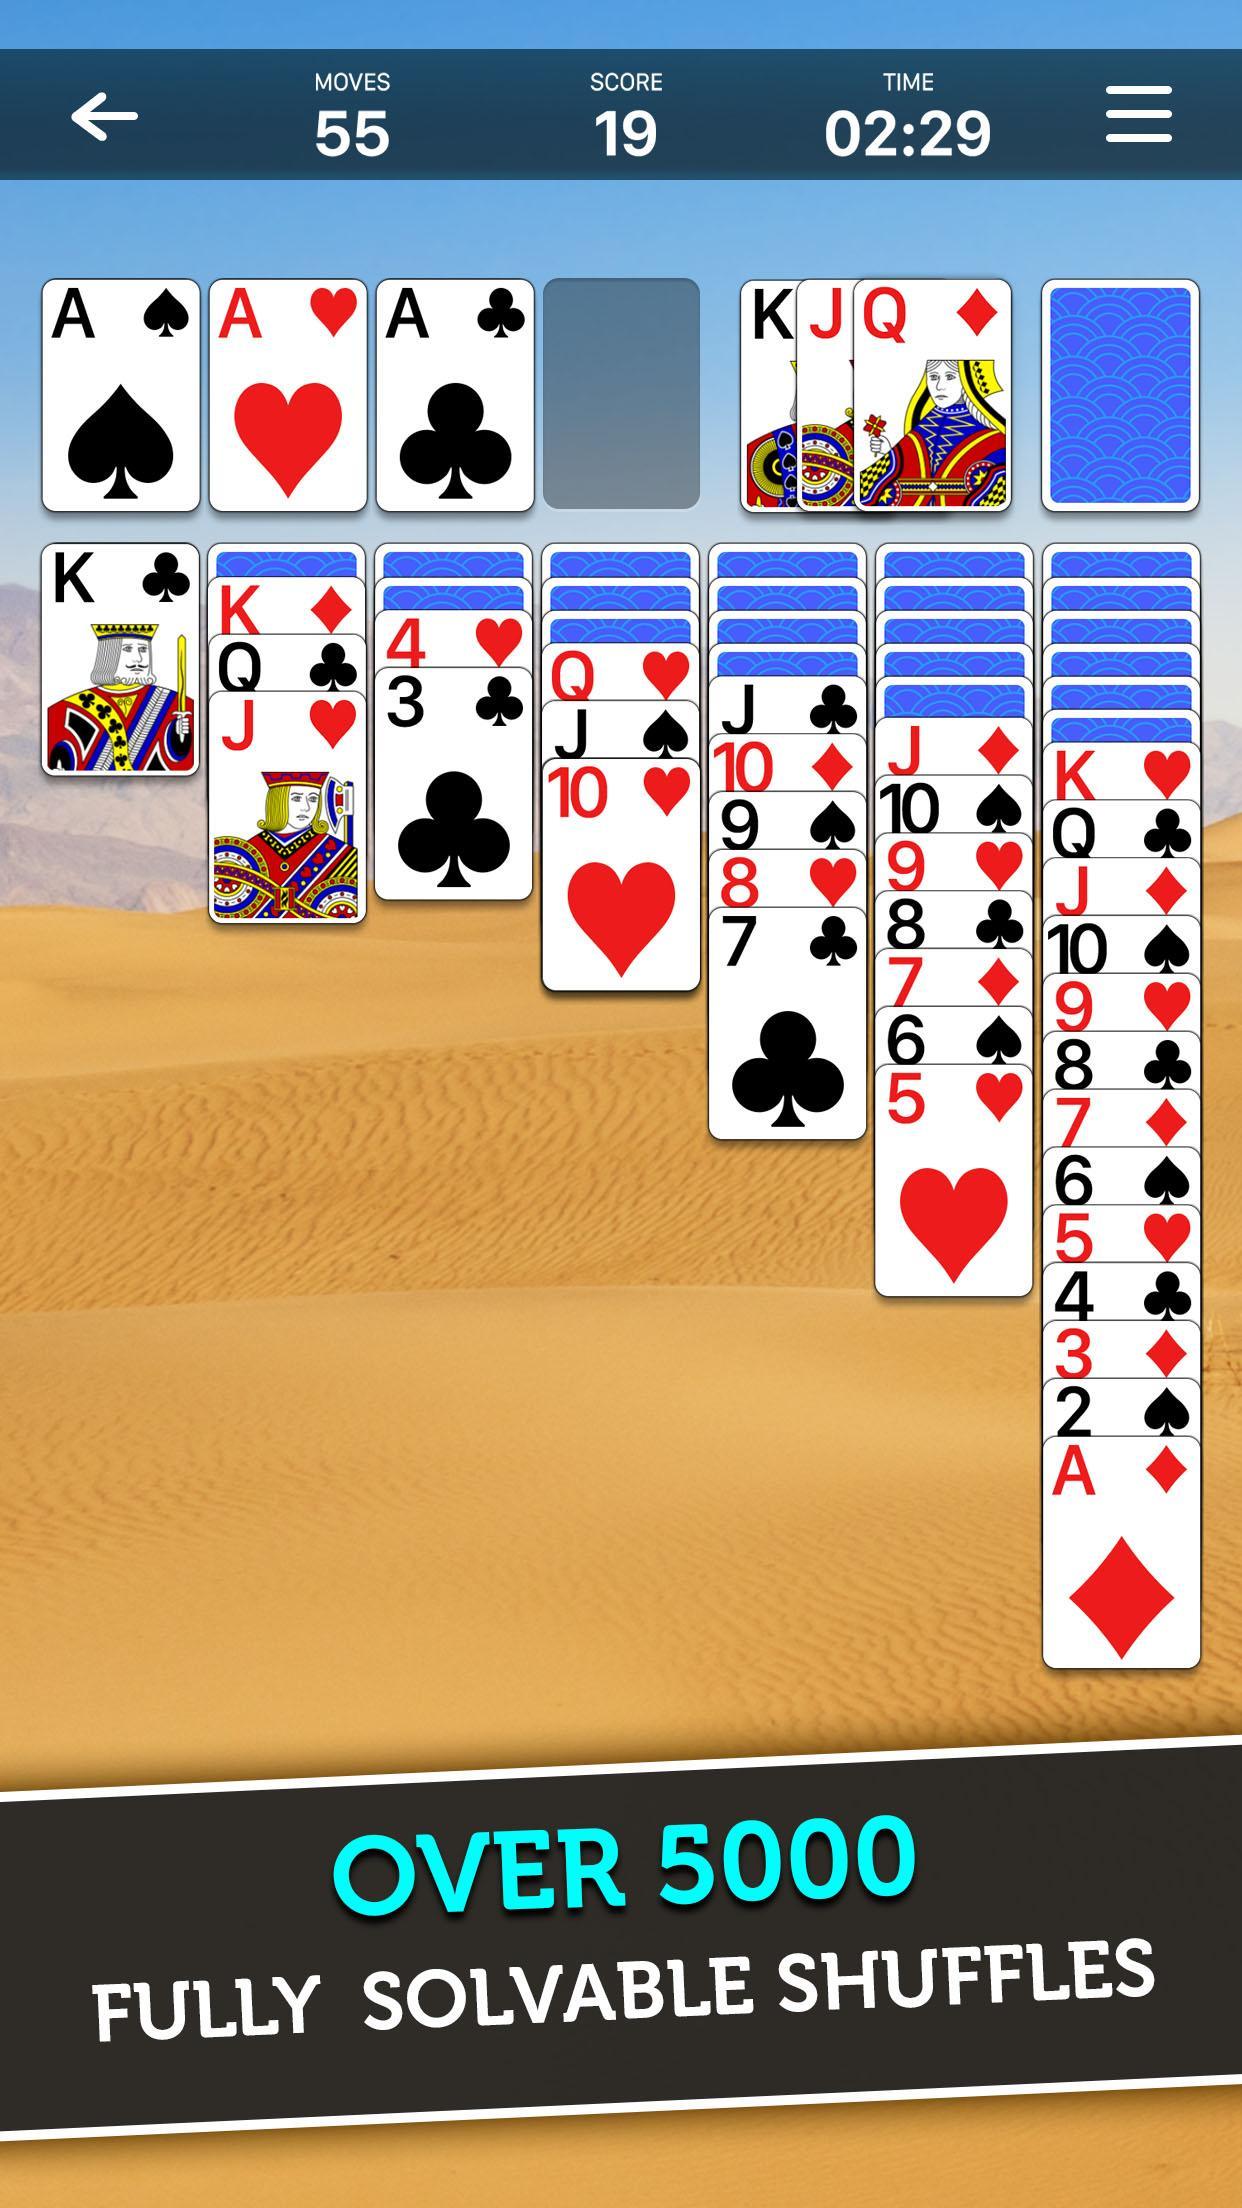 Classic Solitaire 2020 - Free Card Game 1.152.0 Screenshot 2